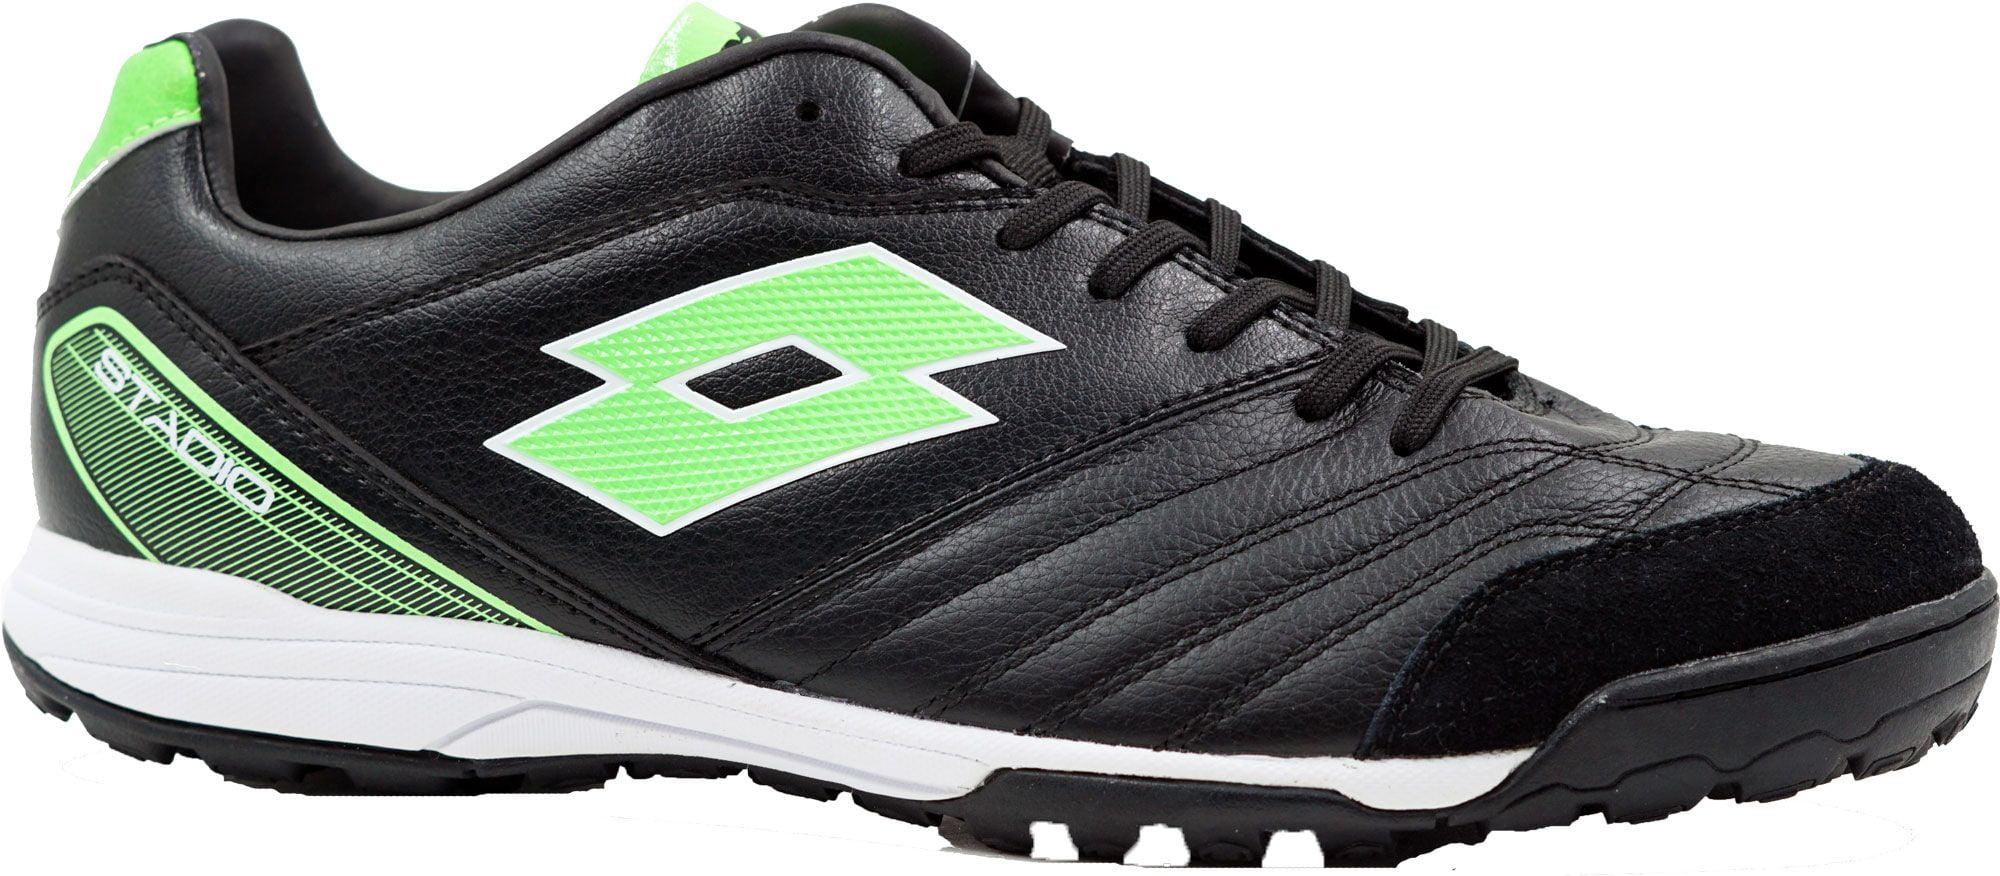 lotto turf shoes